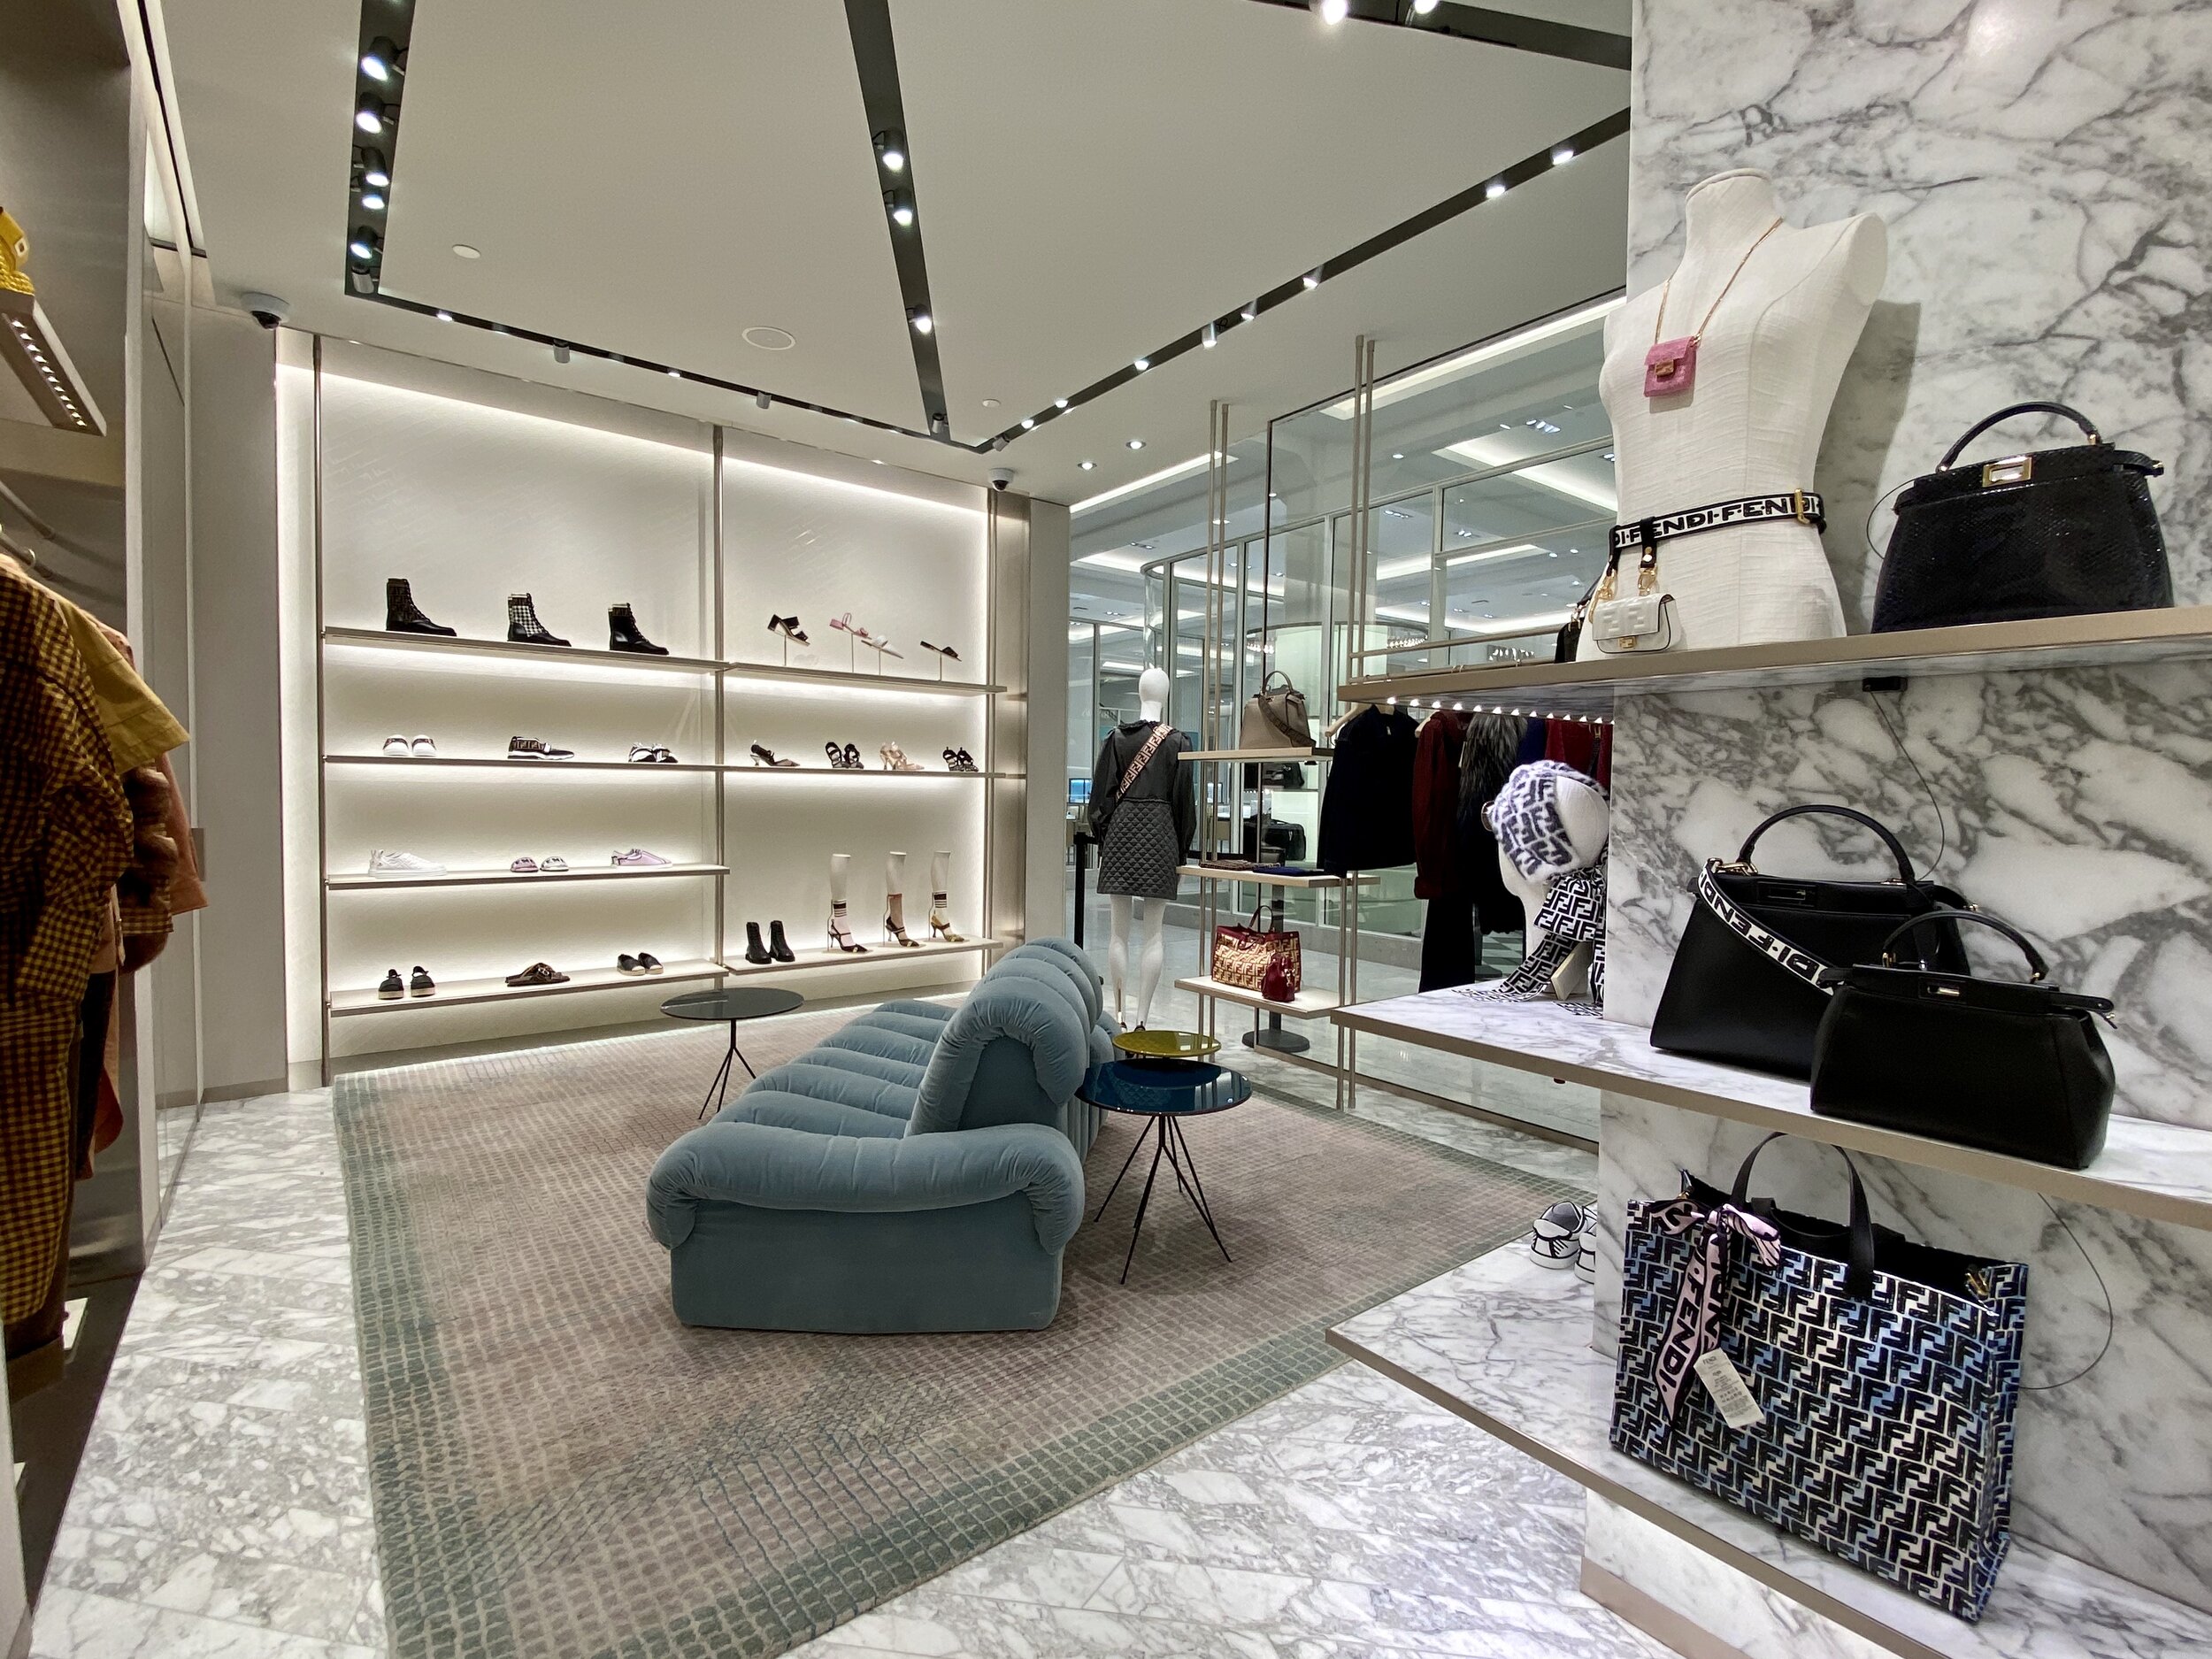 Luxury Brand FENDI Opens 2 Boutiques in Montreal [Photos]